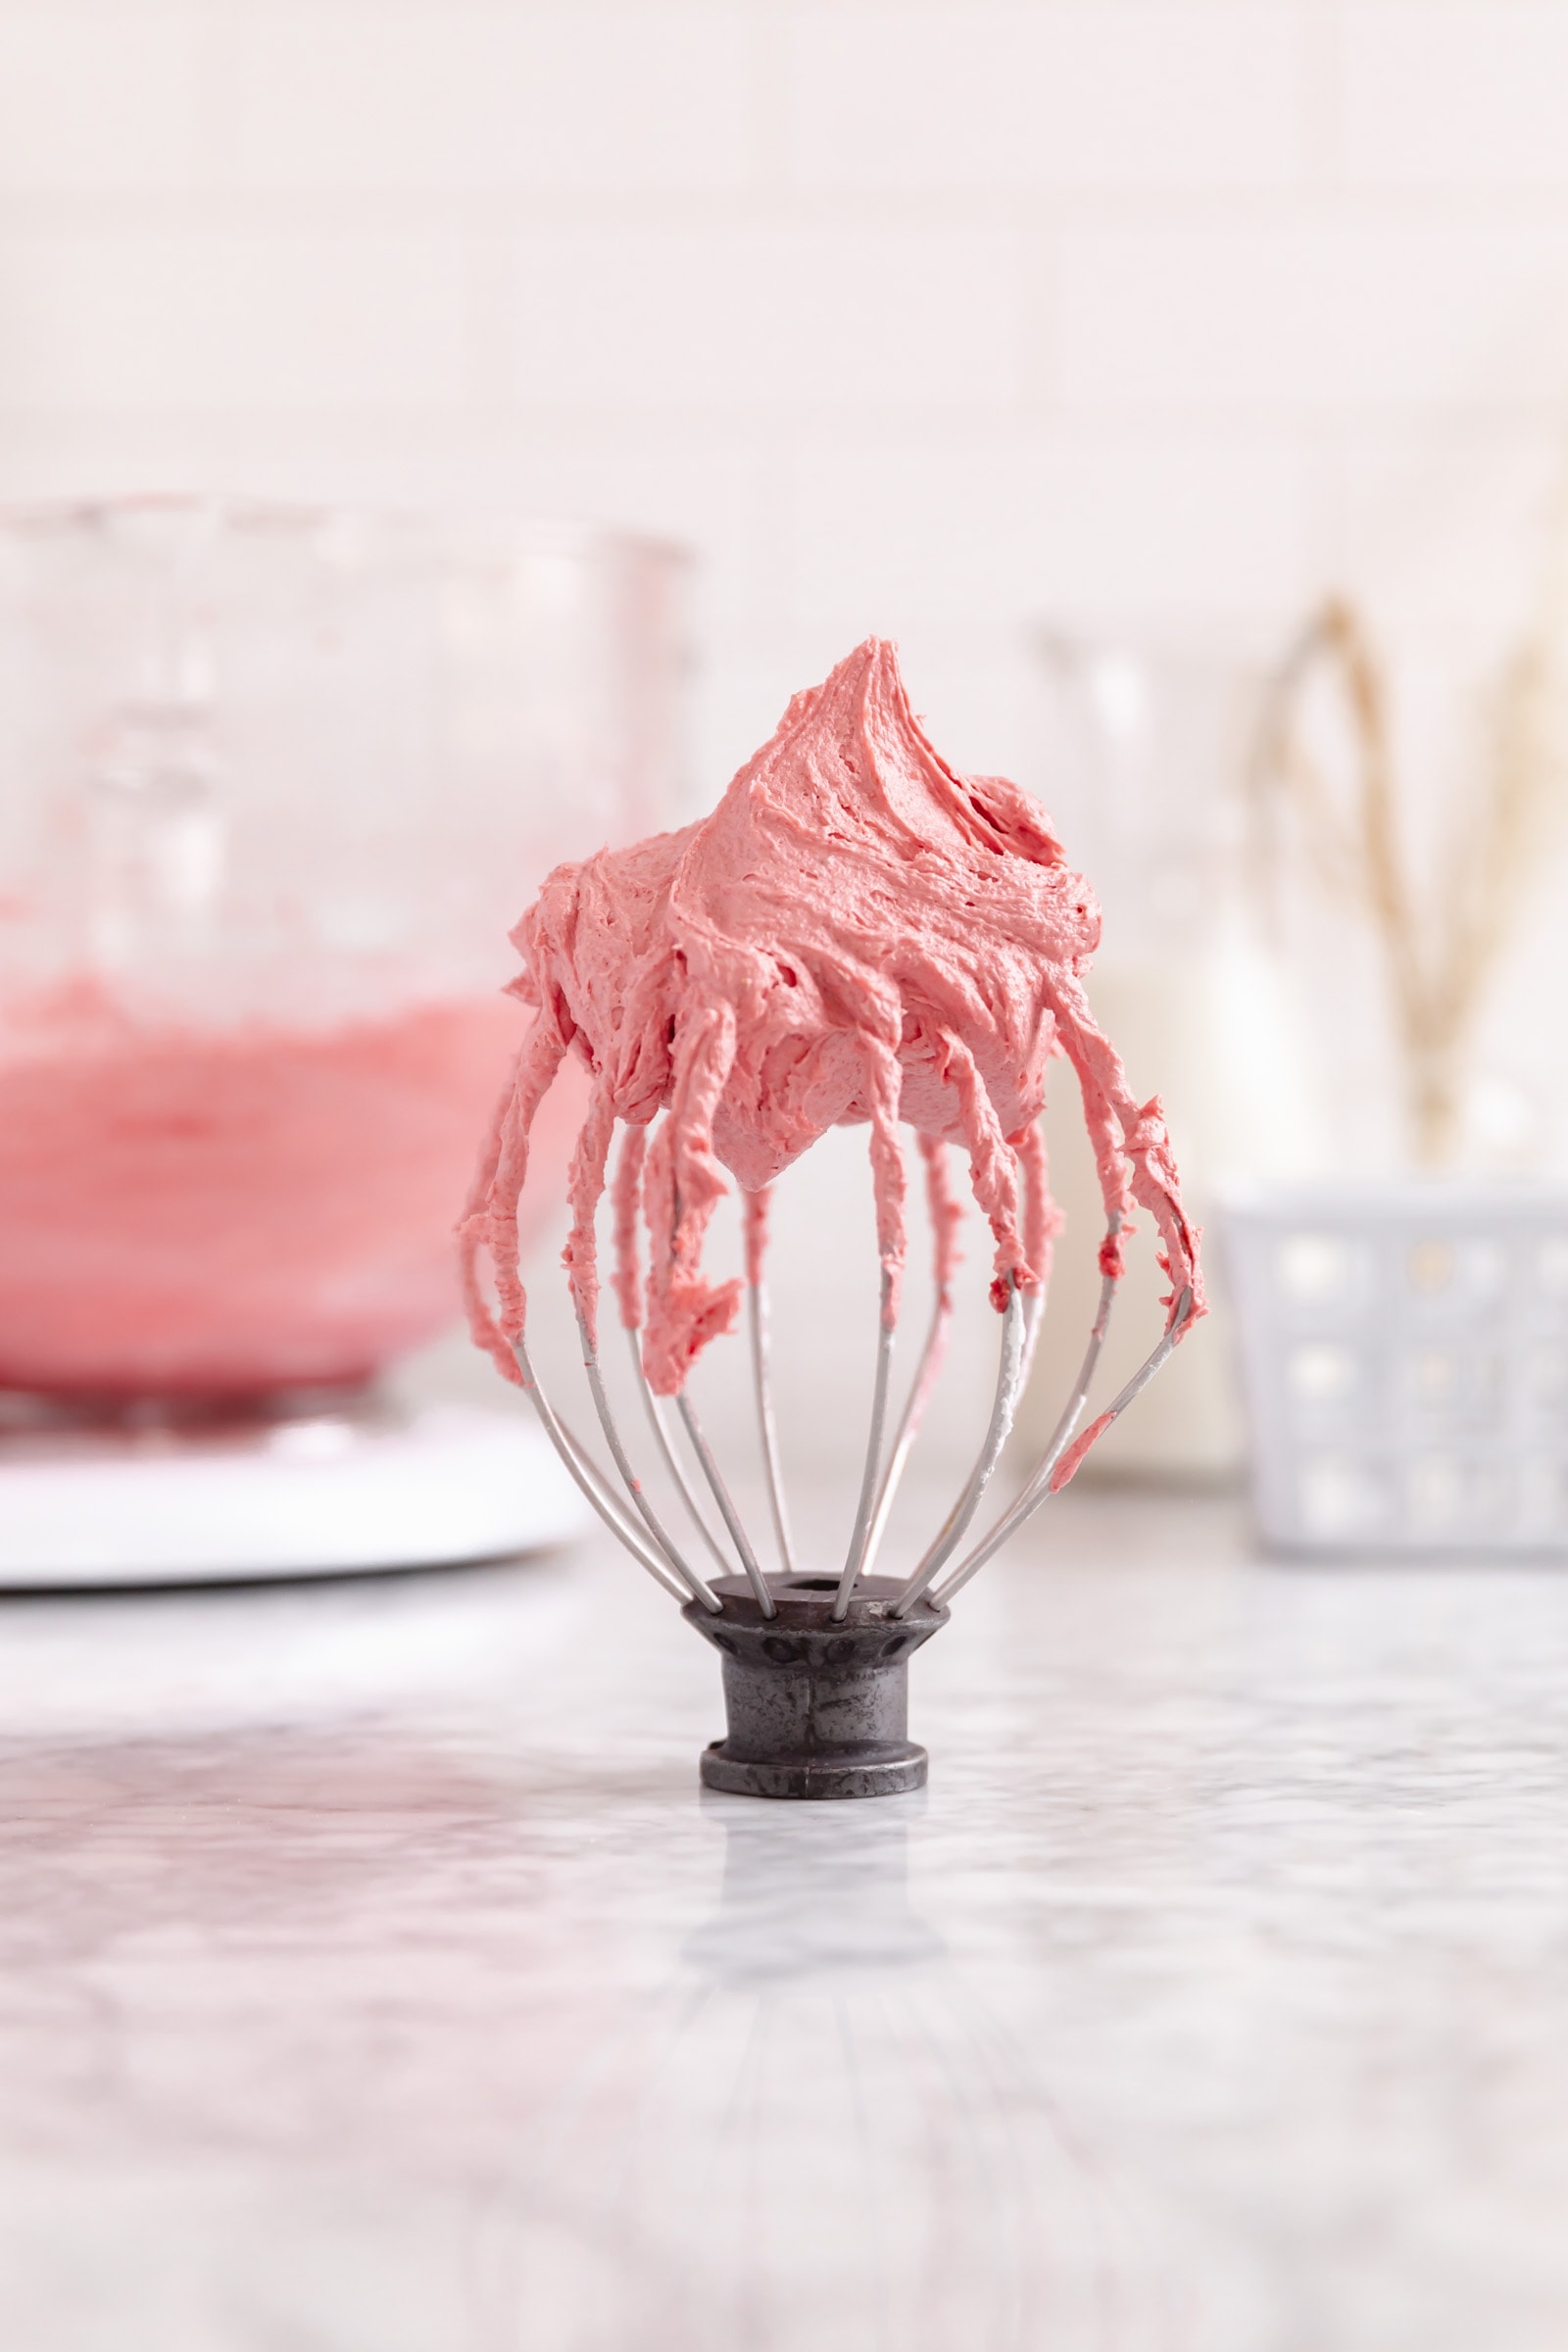 strawberry frosting on a whisk